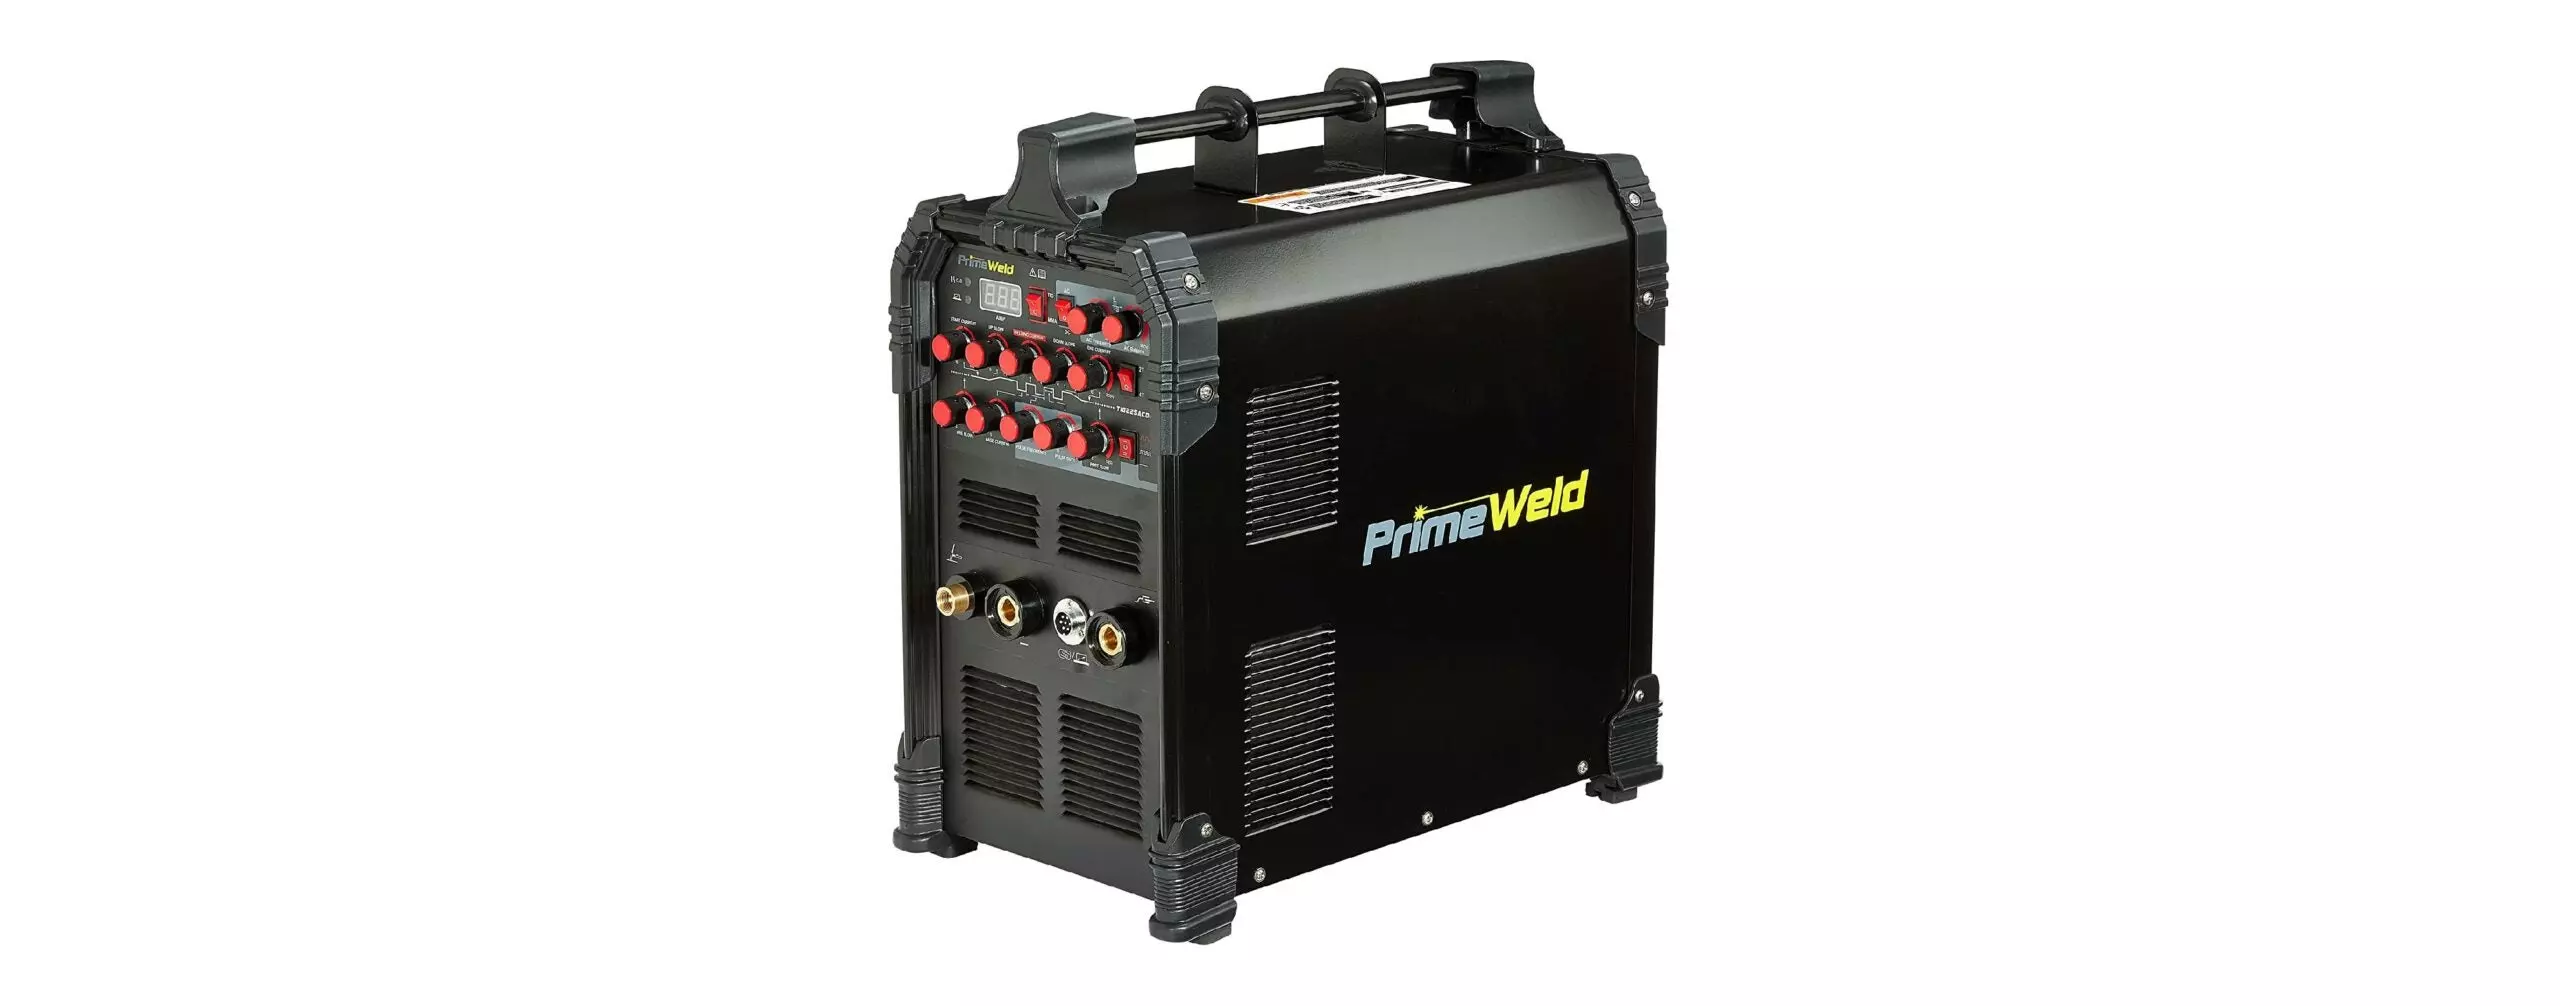 The Best TIG Welders (Review & Buying Guide) in 2022